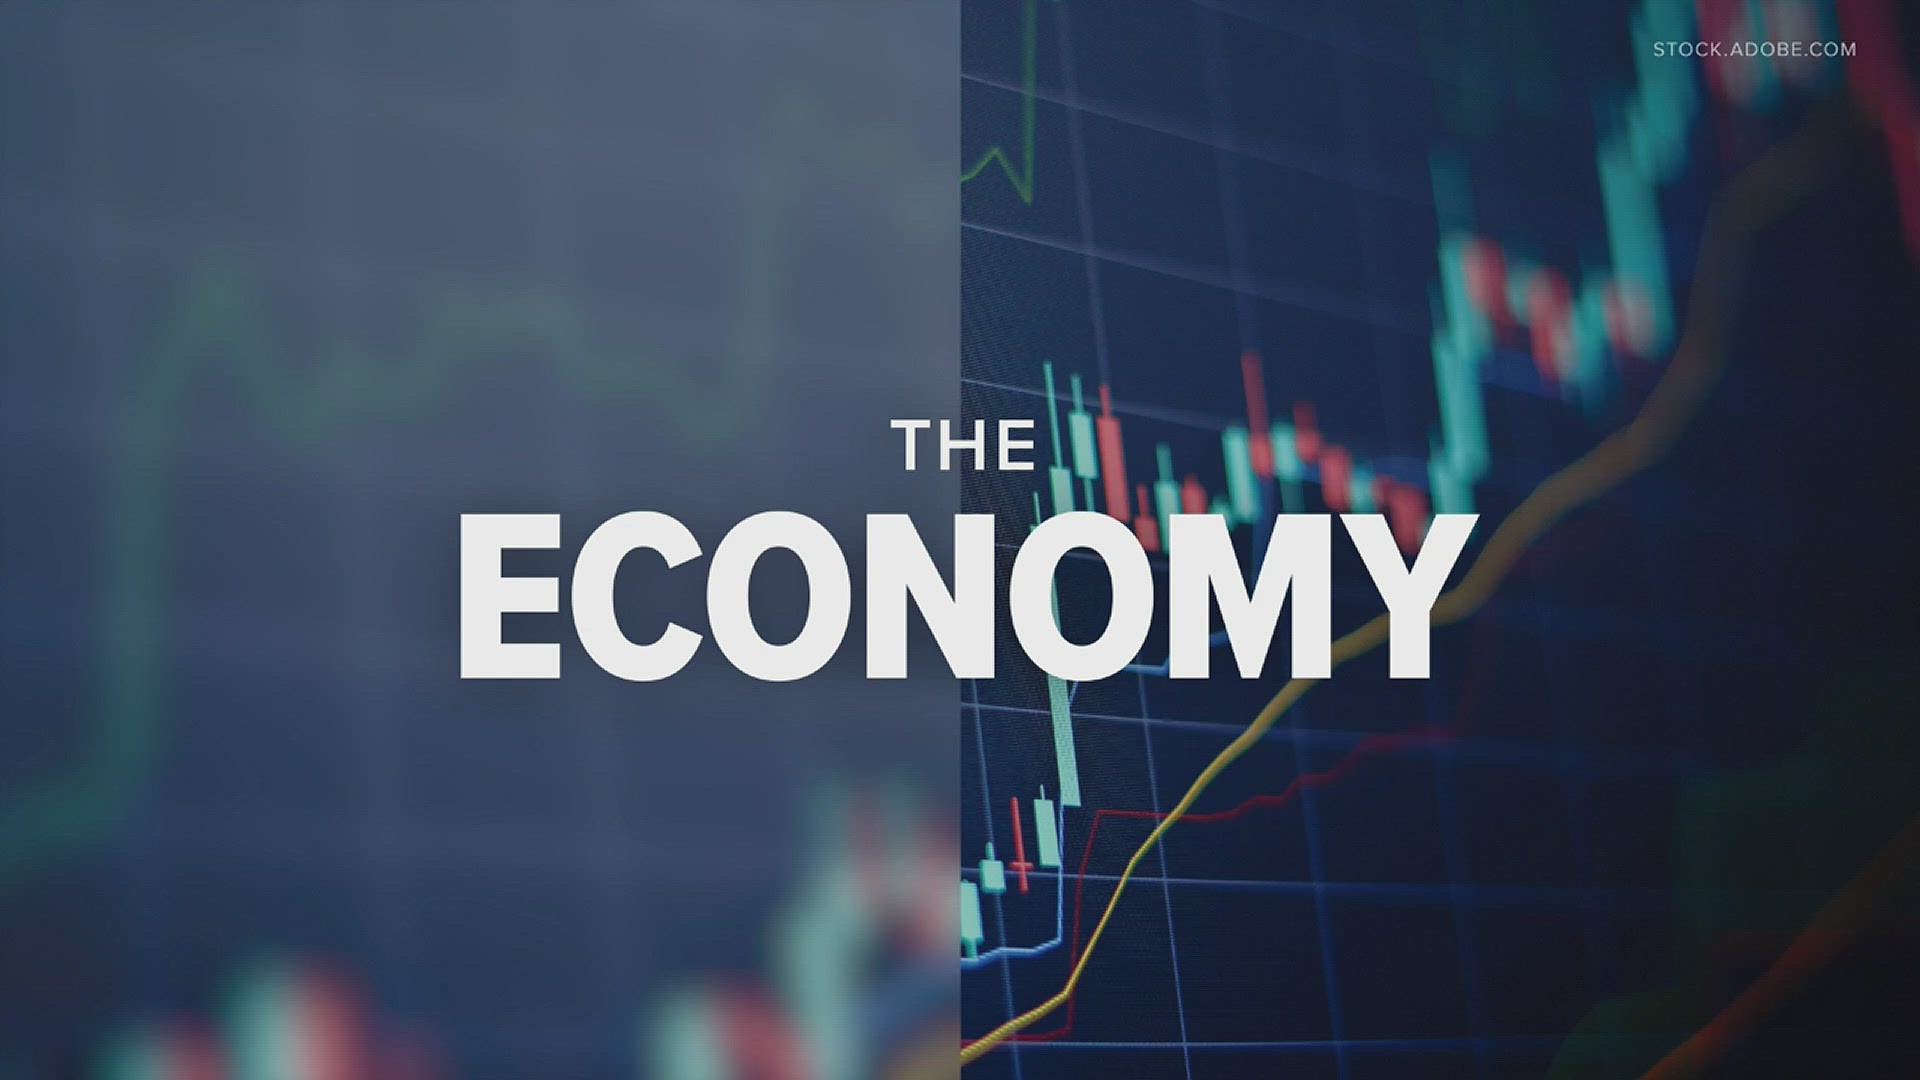 Financial analysts share a less-than-optimistic outlook on the economy. Housing, groceries and automobile markets continue to carry higher price tags from inflation.